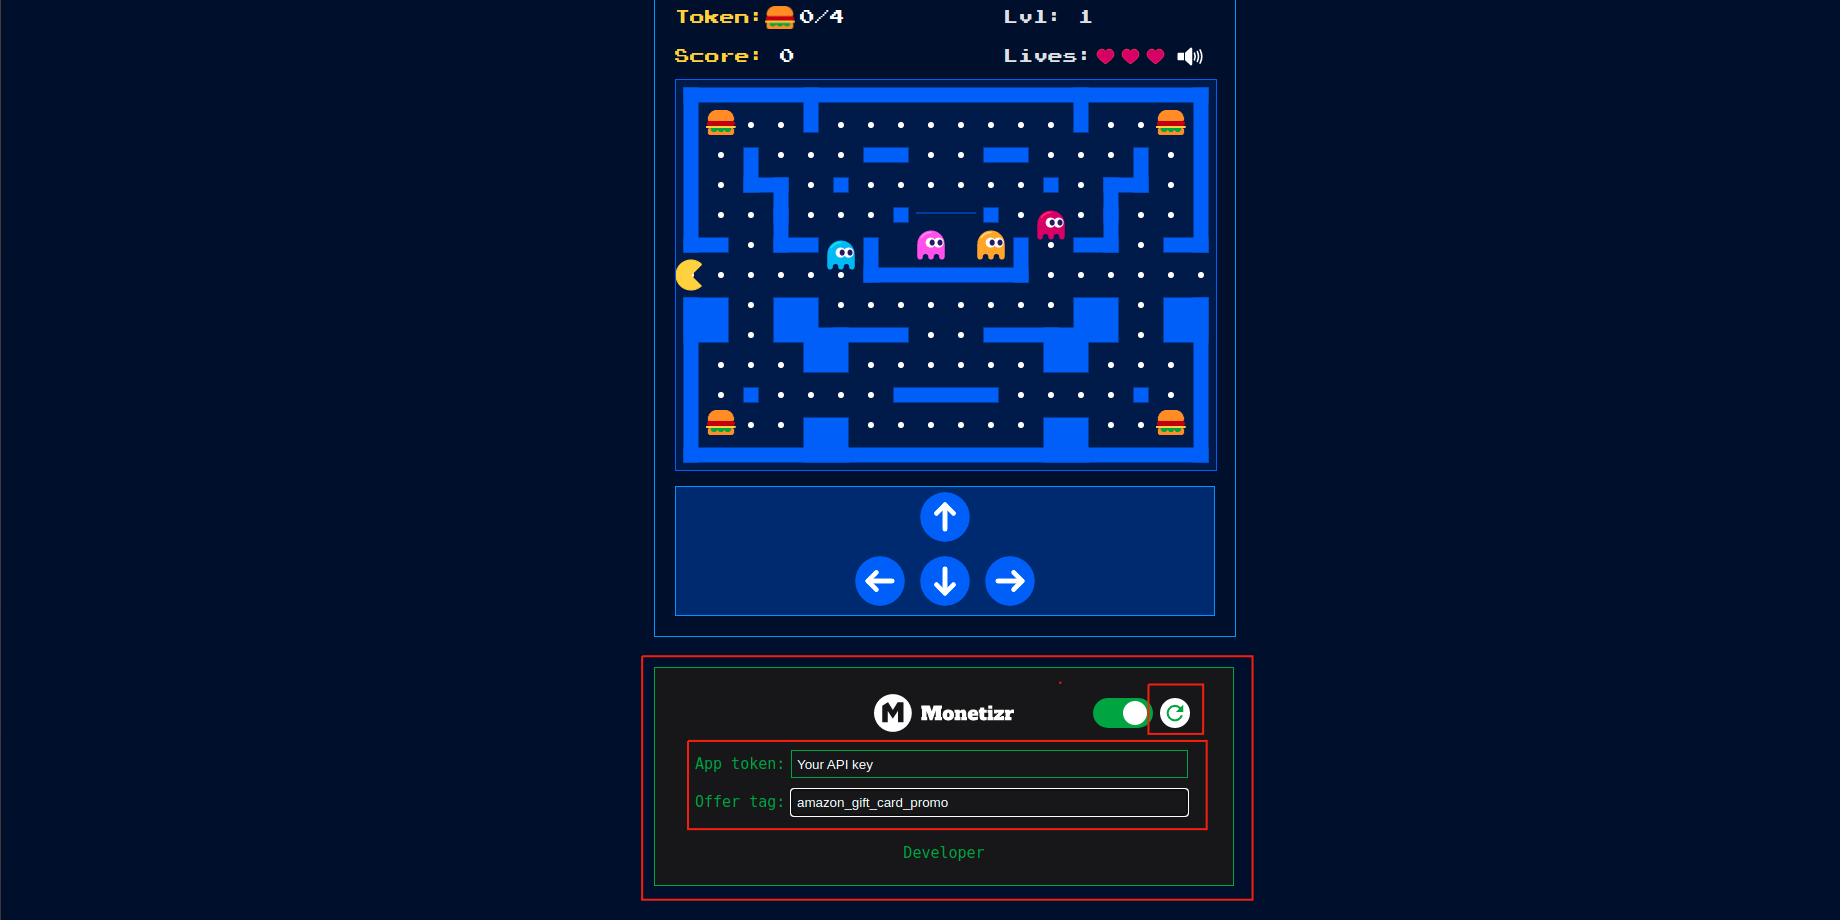 Check how your offer looks in pacman